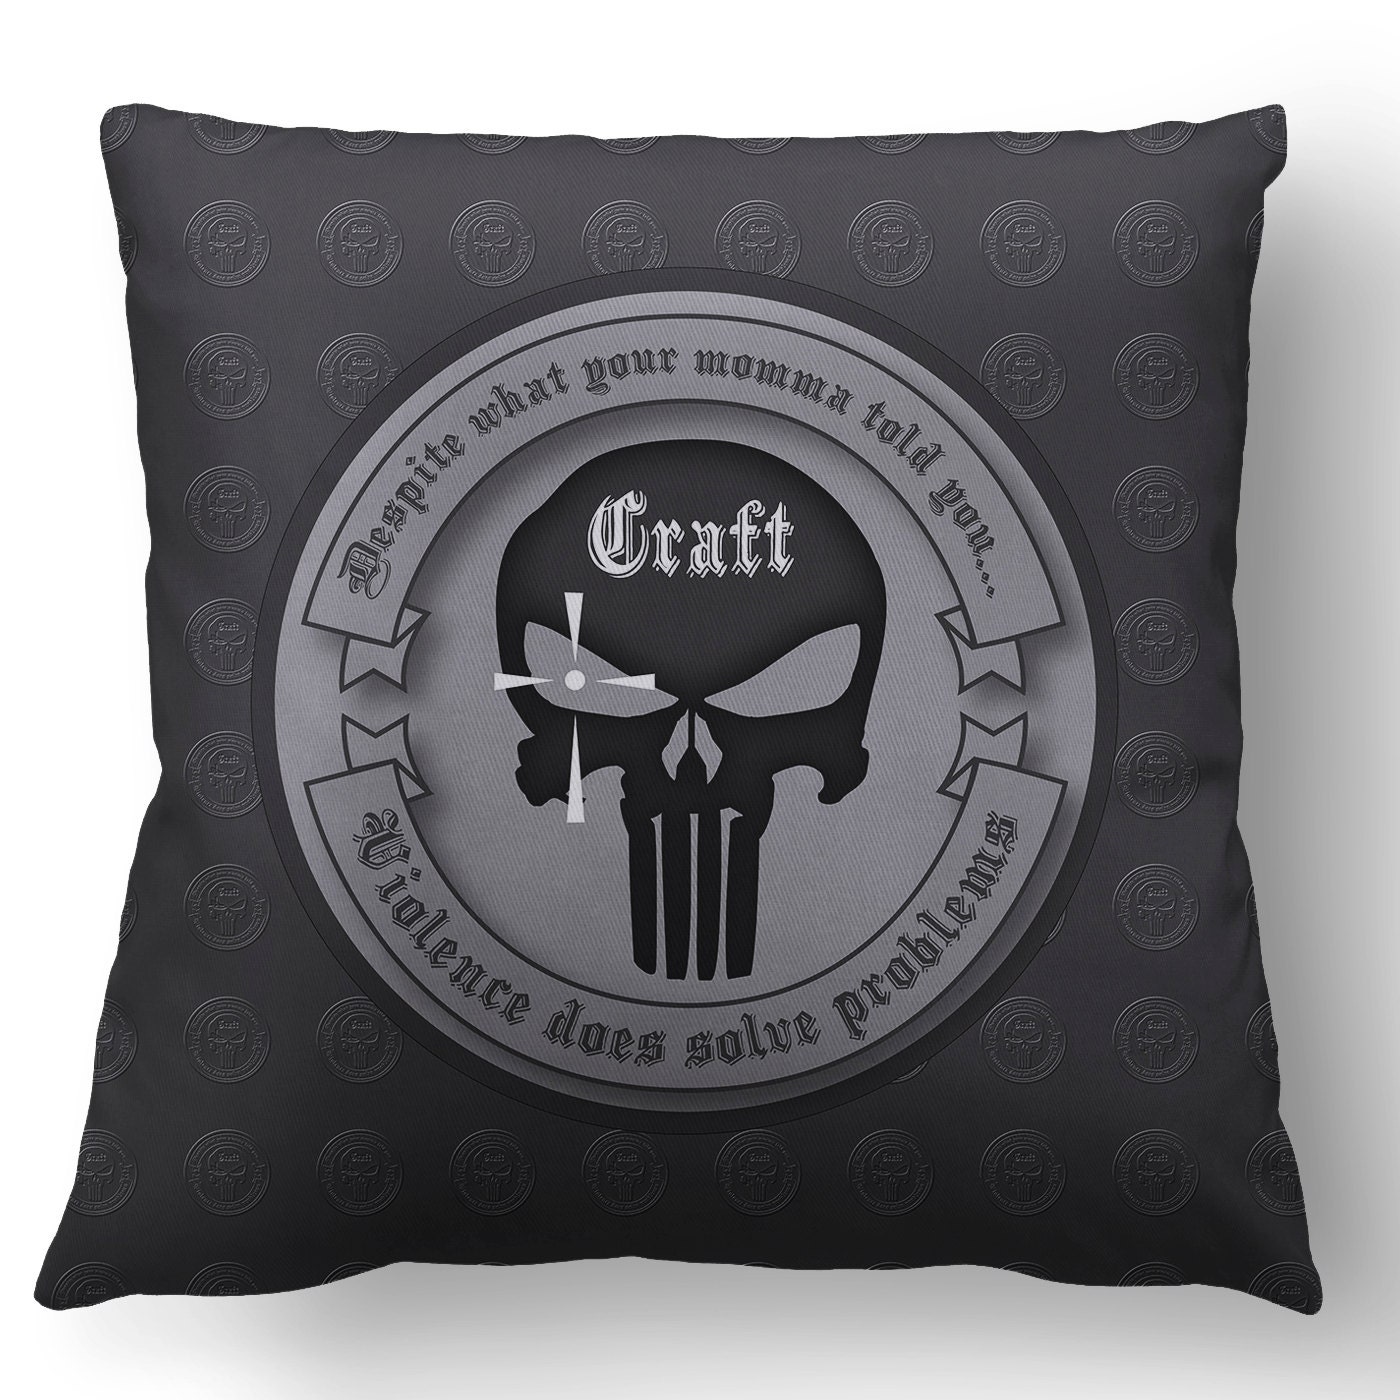 PUNISHER blanket, funny blanket, cute and awesome blanket ...